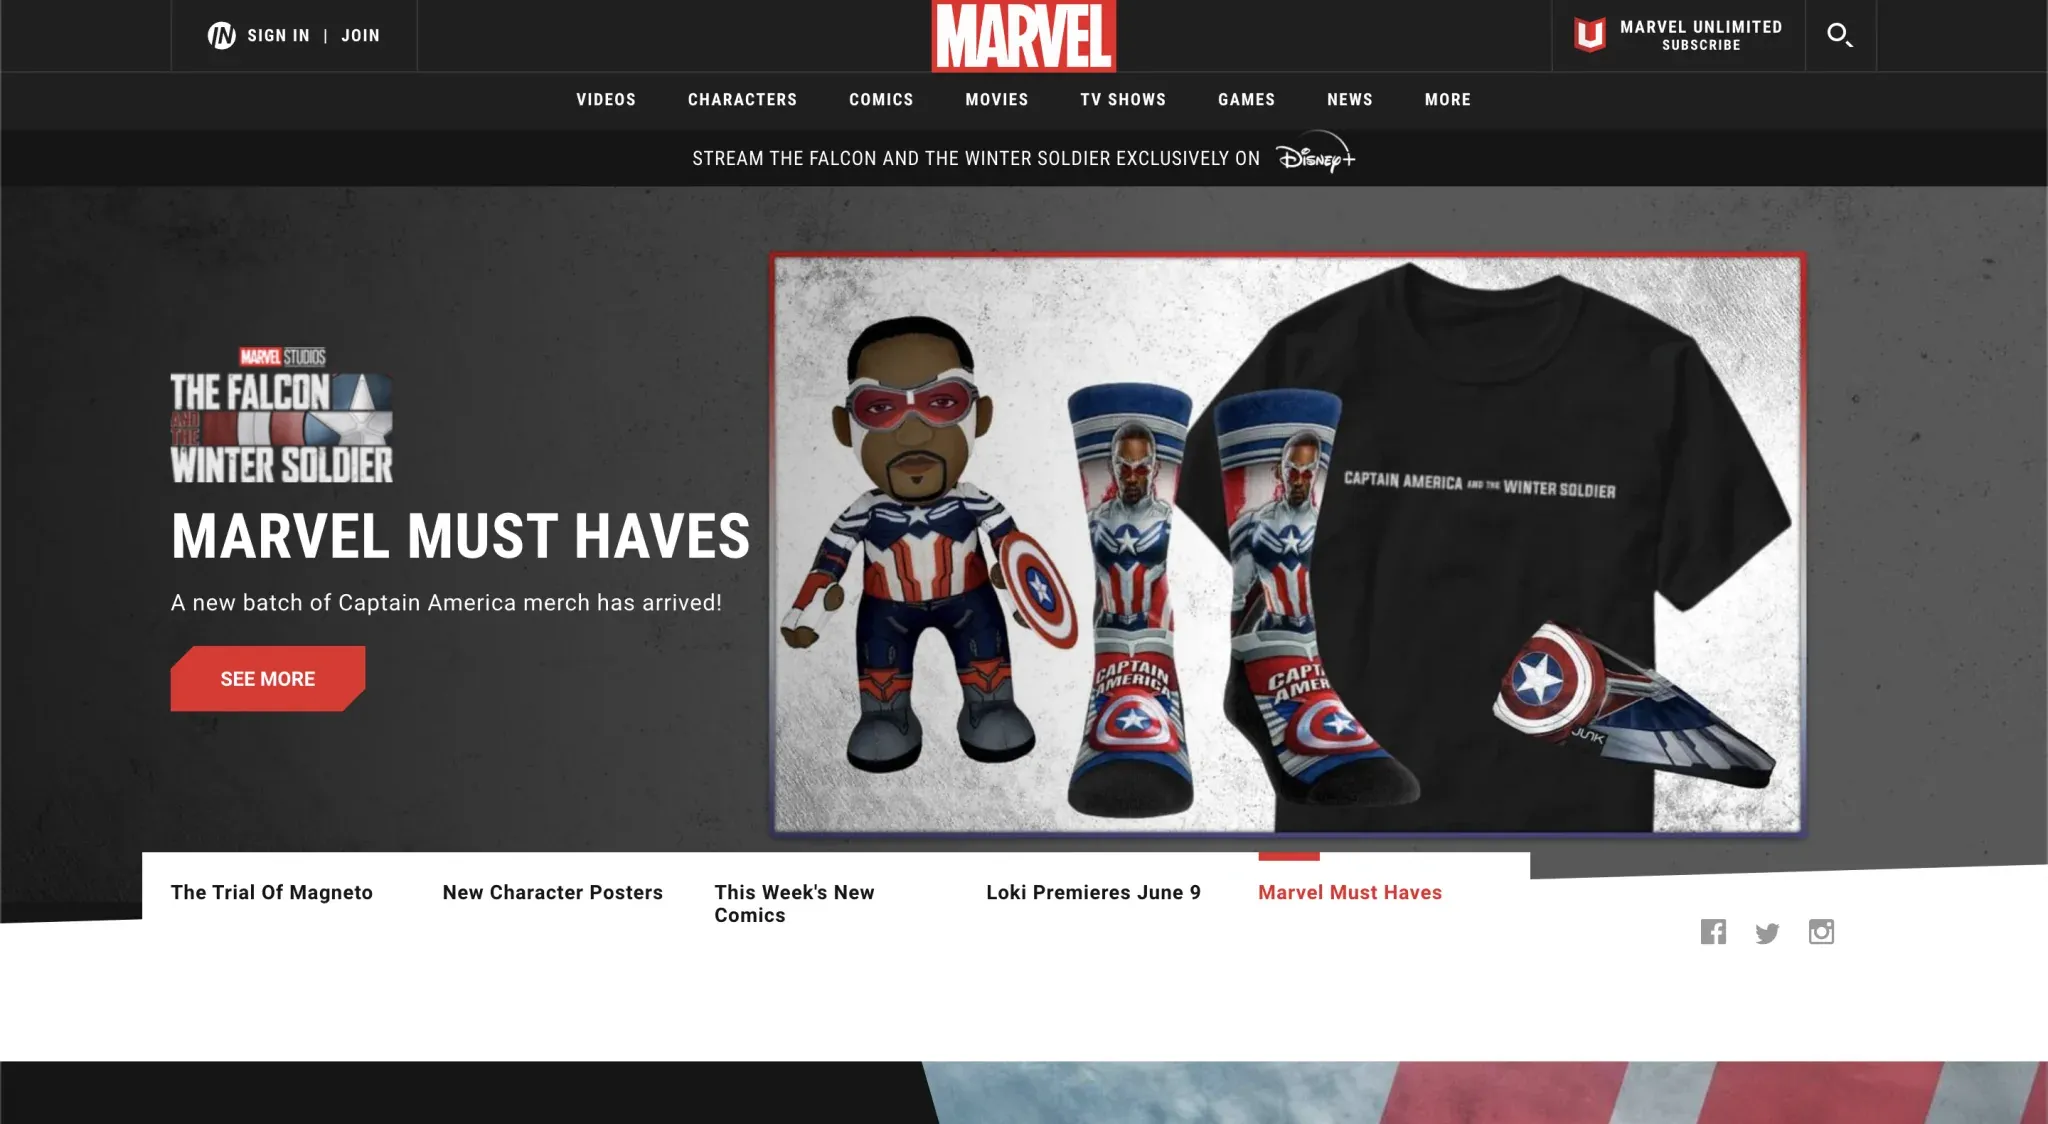 Marvel.com is the official Next JS website for Marvel movies, characters, comics, and TV.